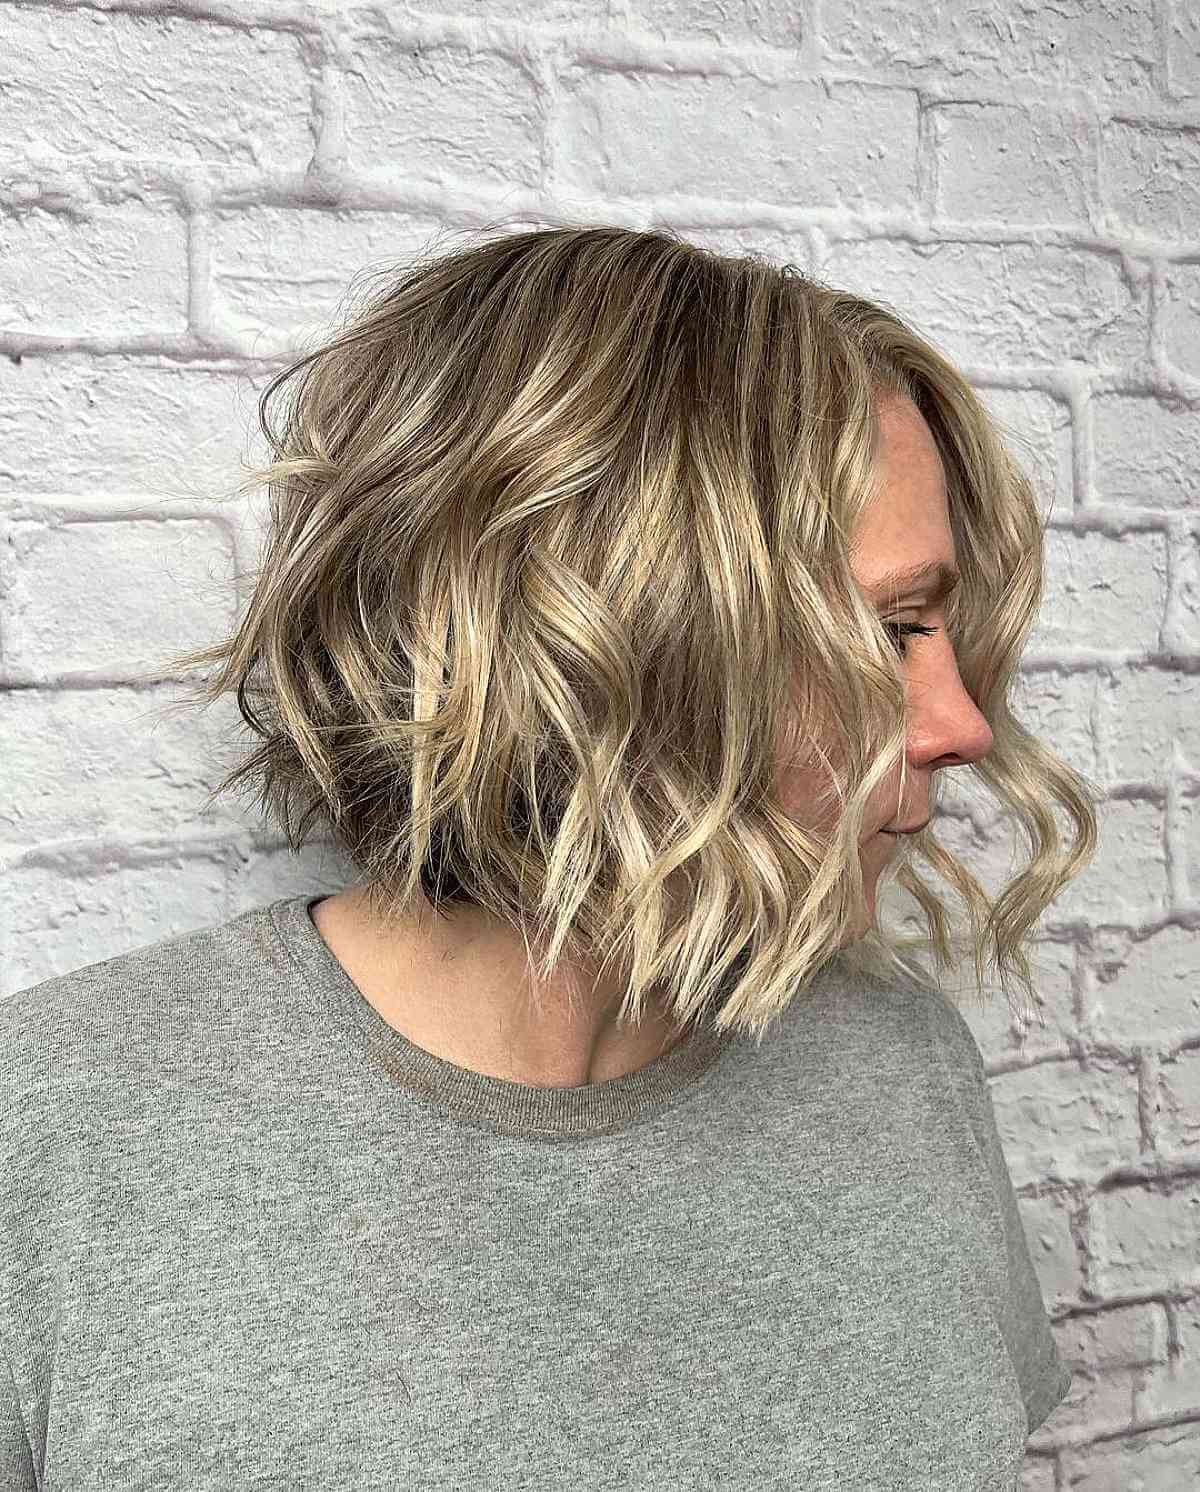 Wavy A-Line Lob Cut with Choppy Ends That is Above the Shoulders